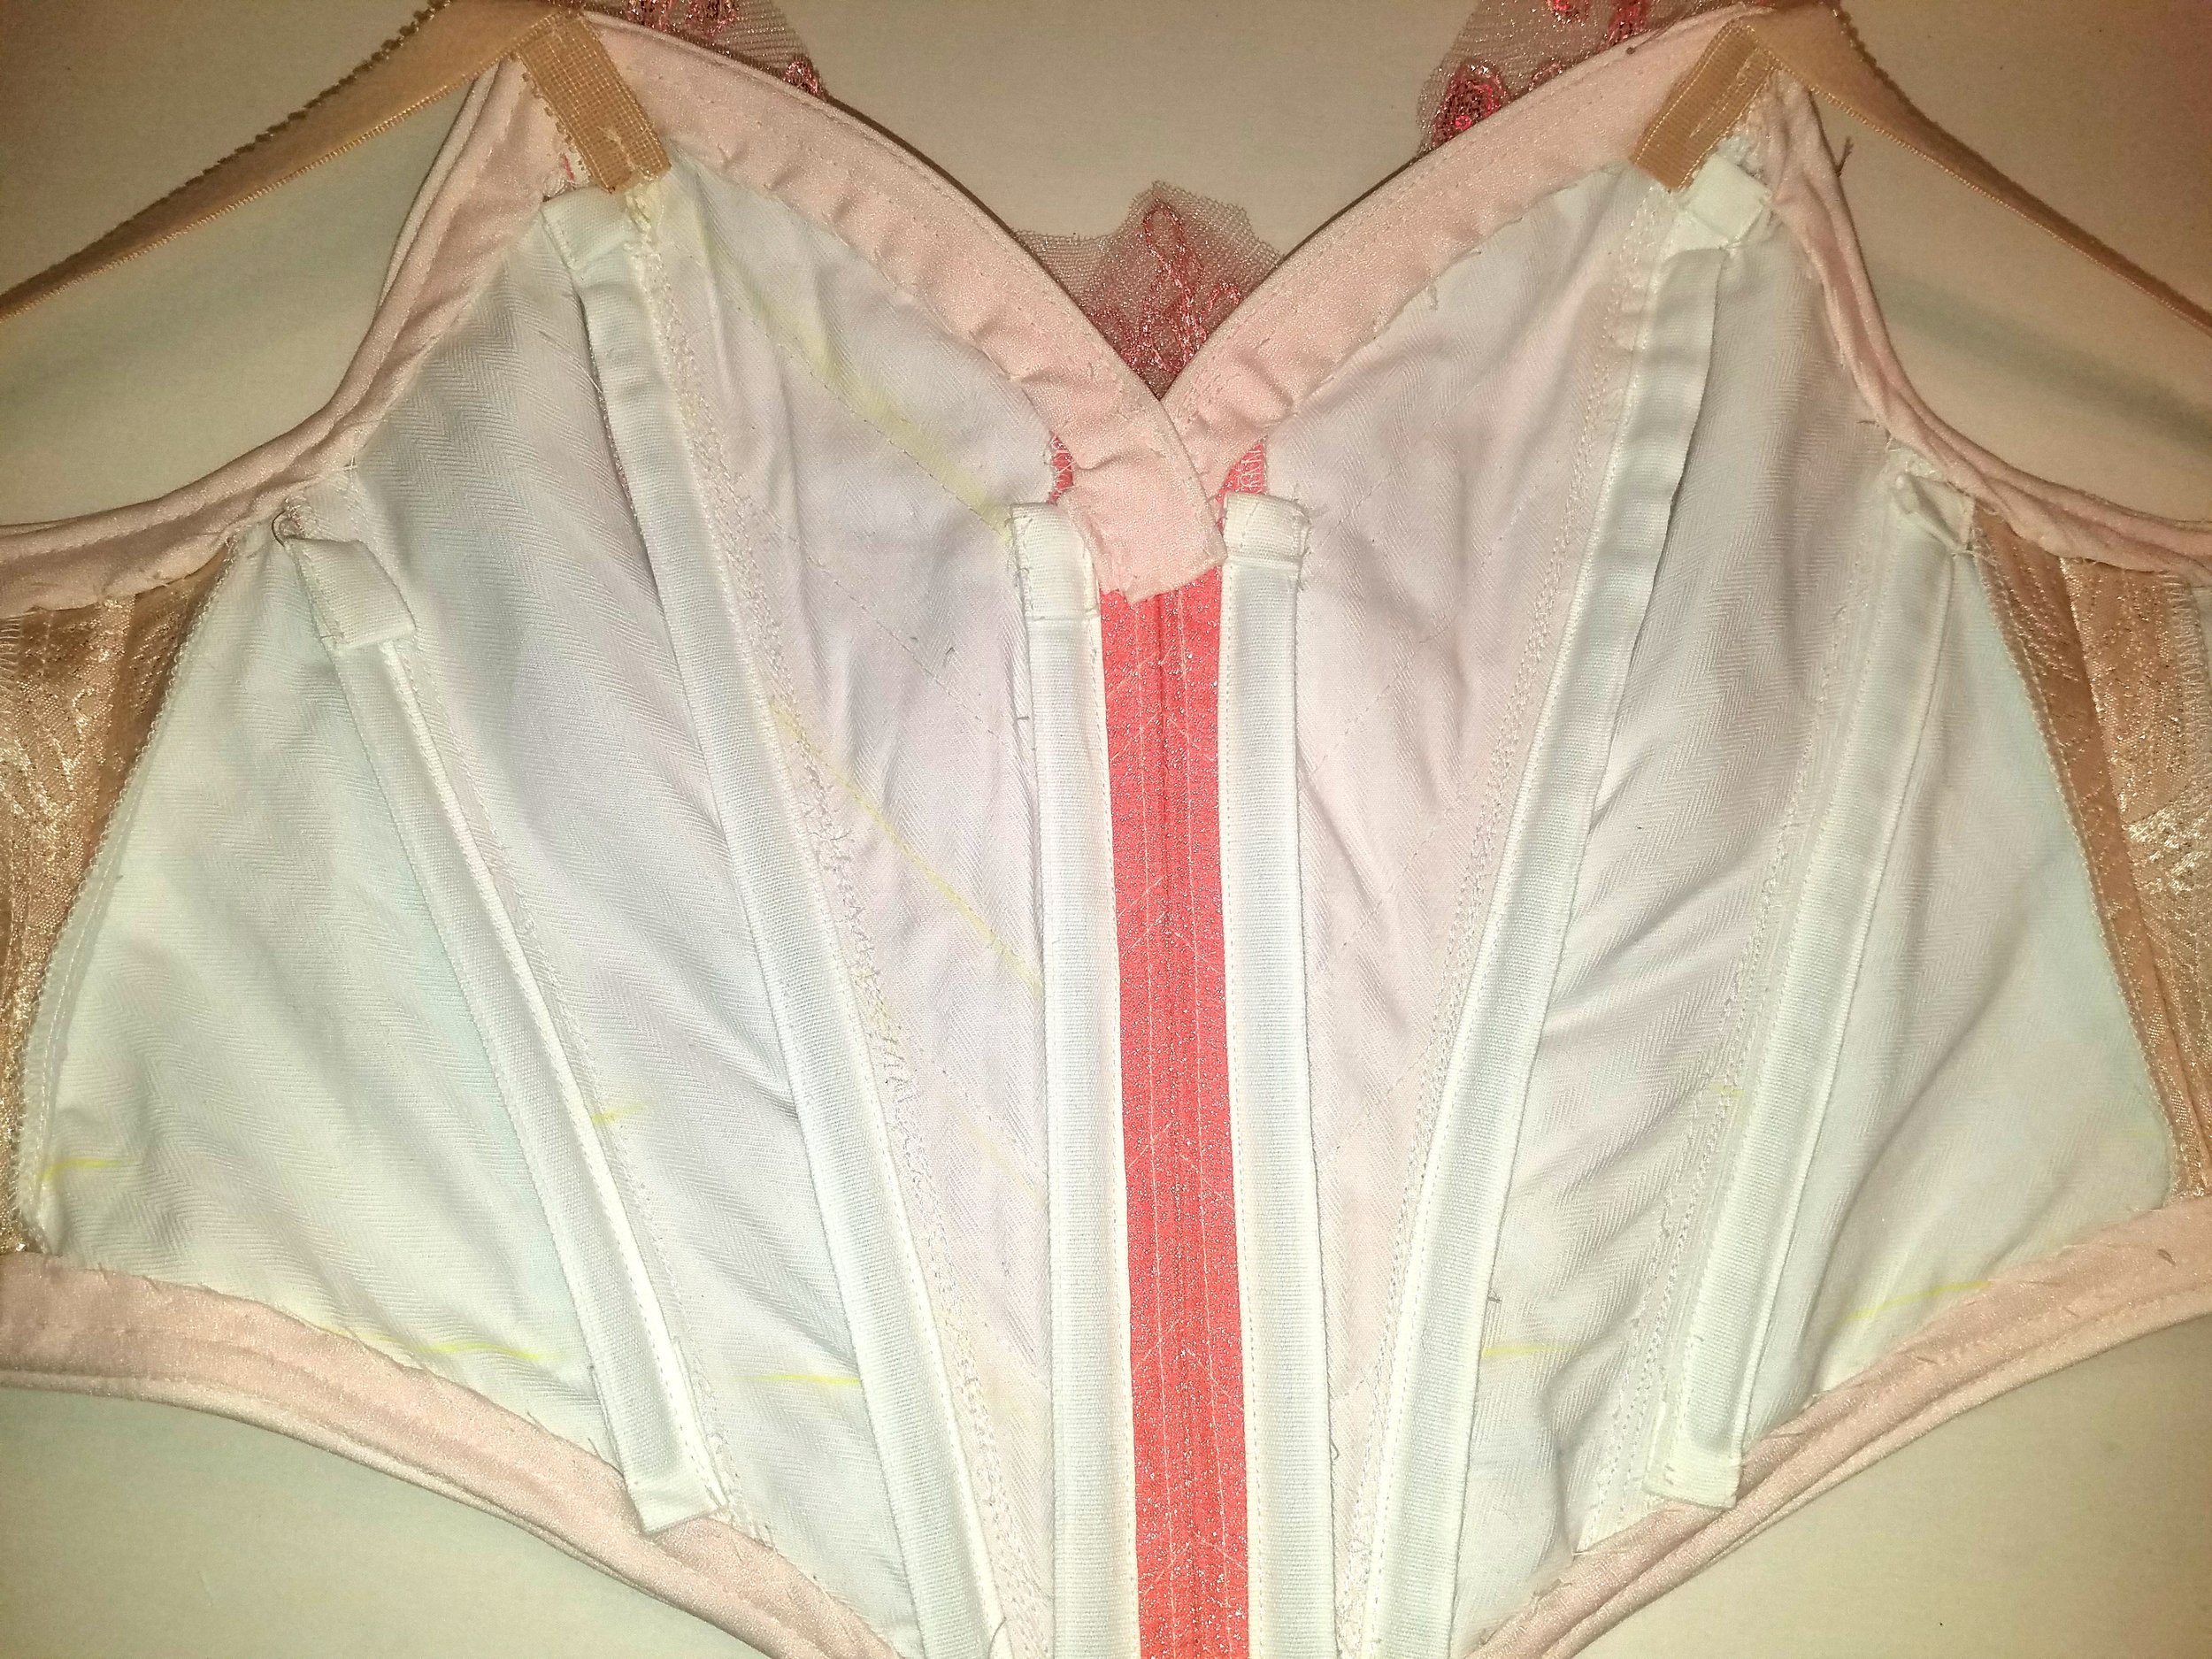  inside of bodice- Coutil cotton lining with steel boning 